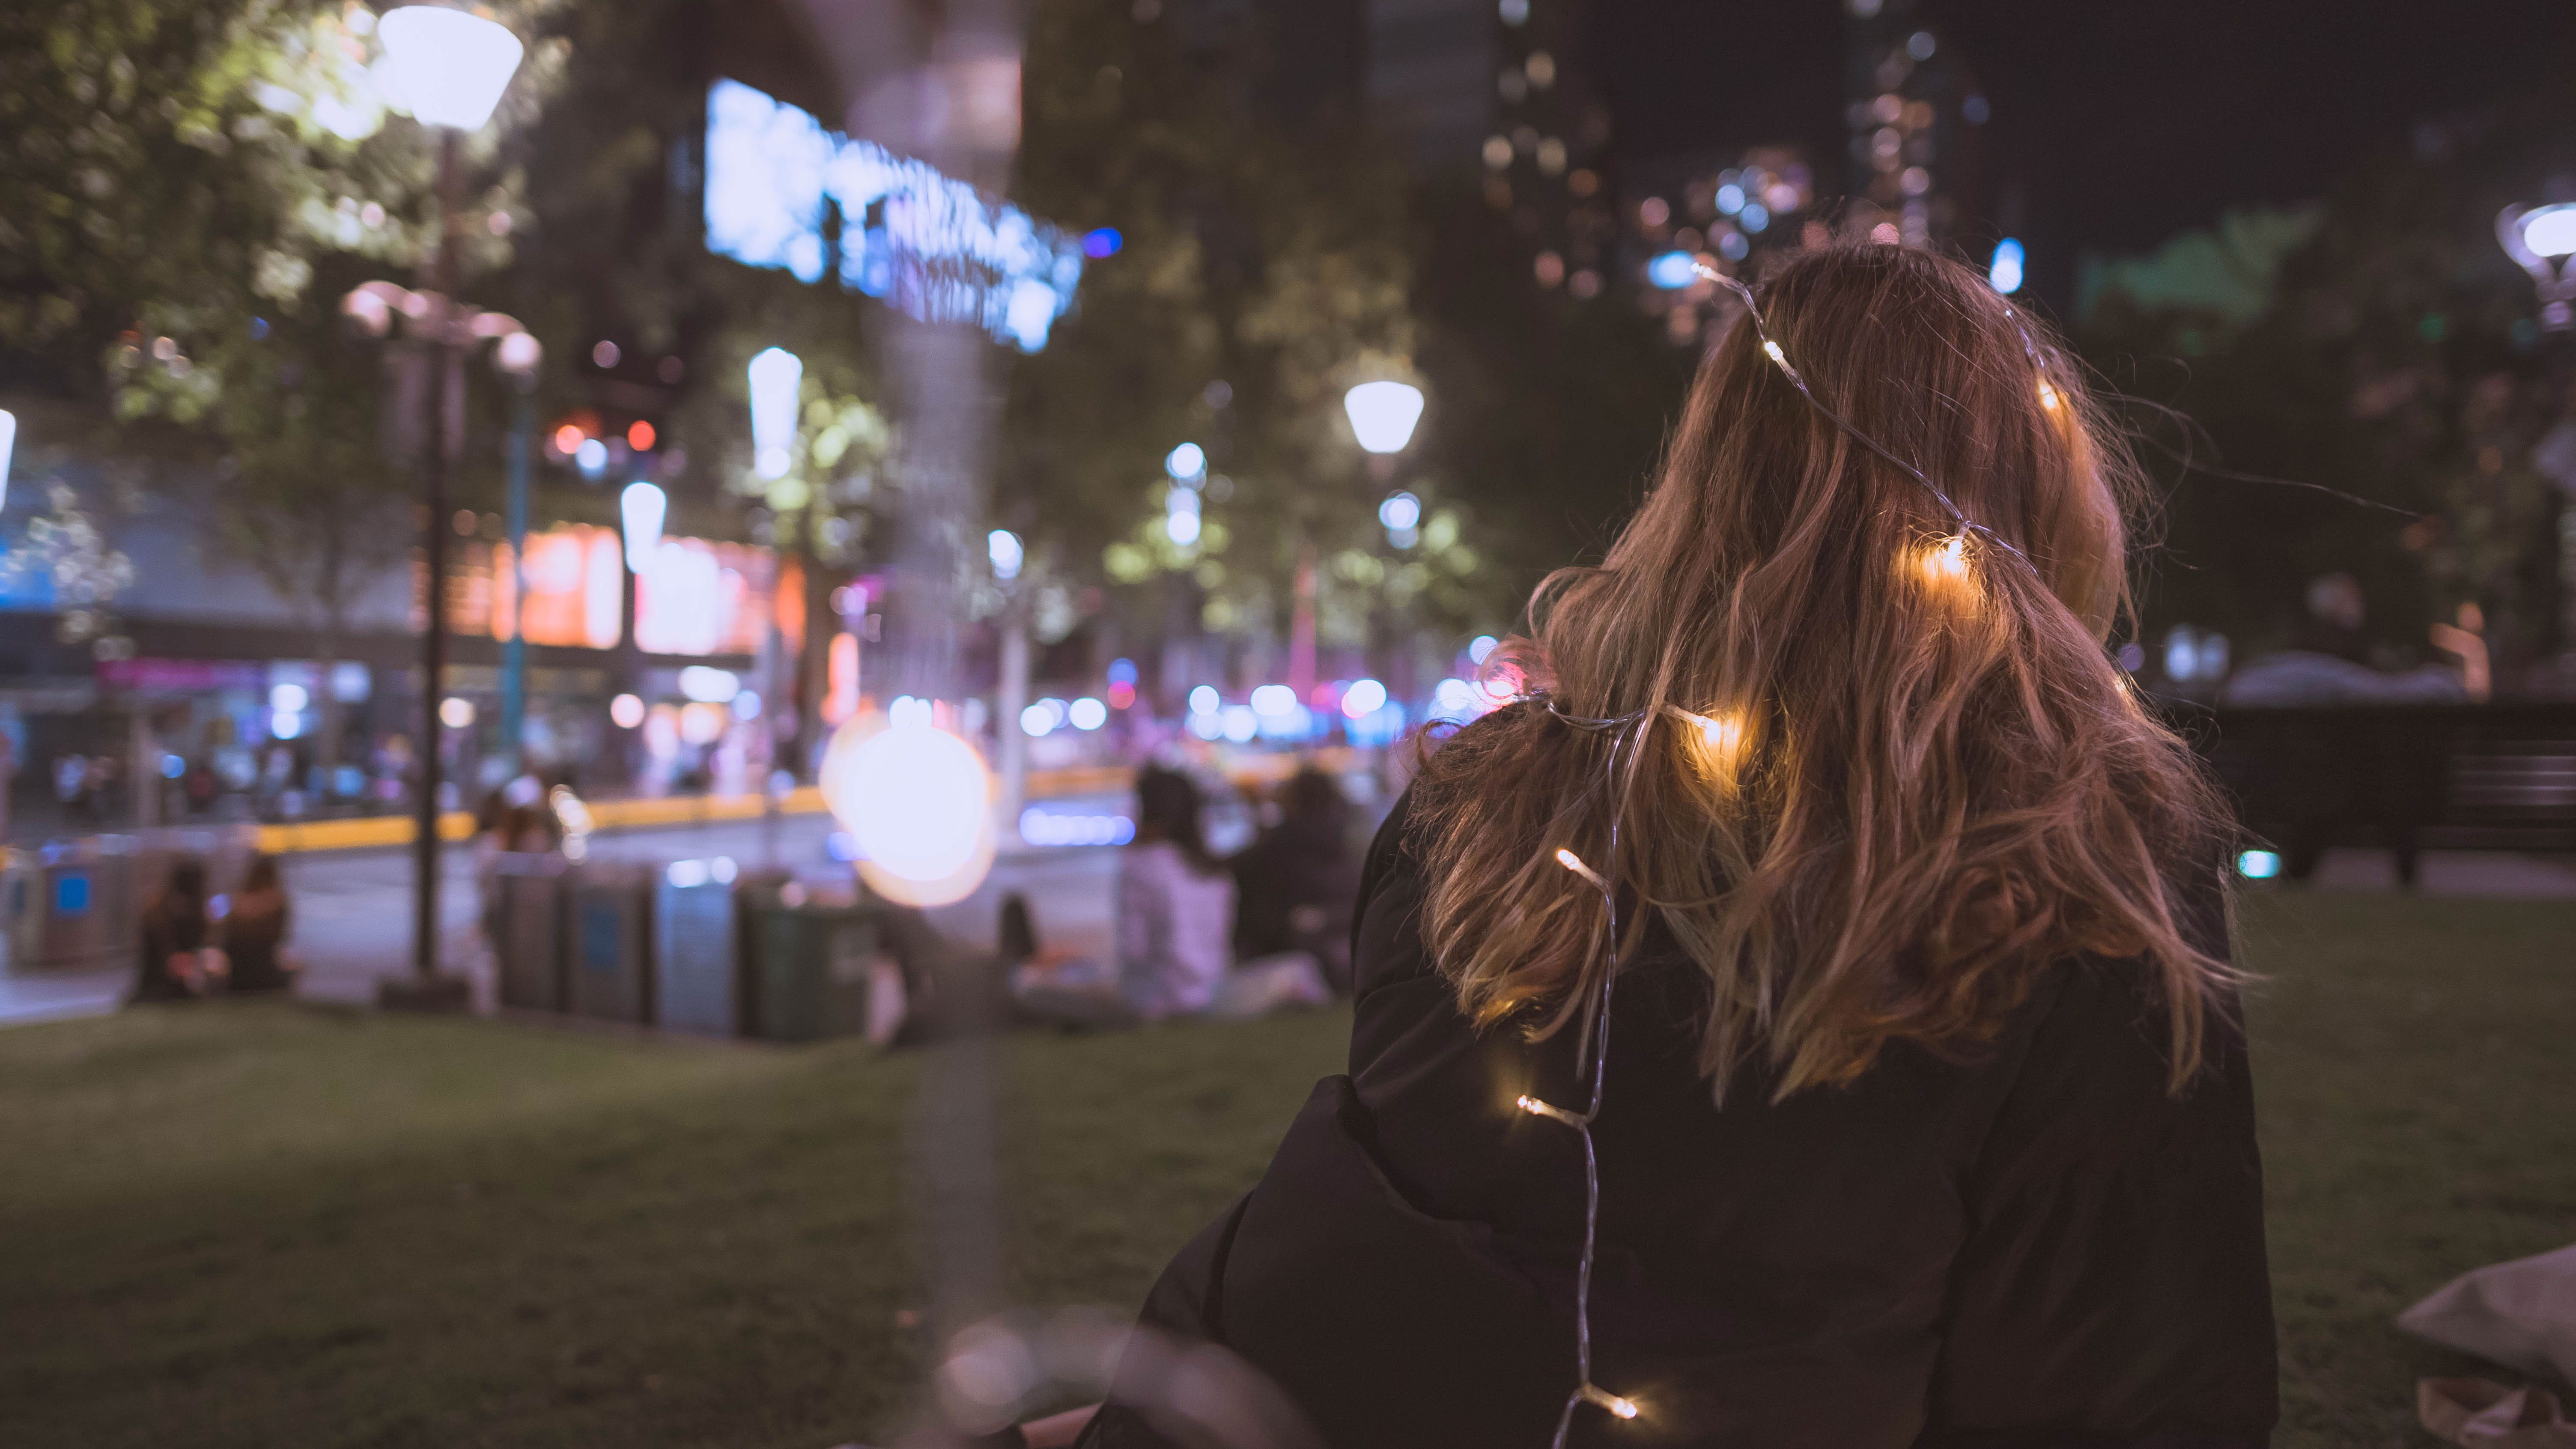 A woman sitting on the ground in front of some lights - Grunge